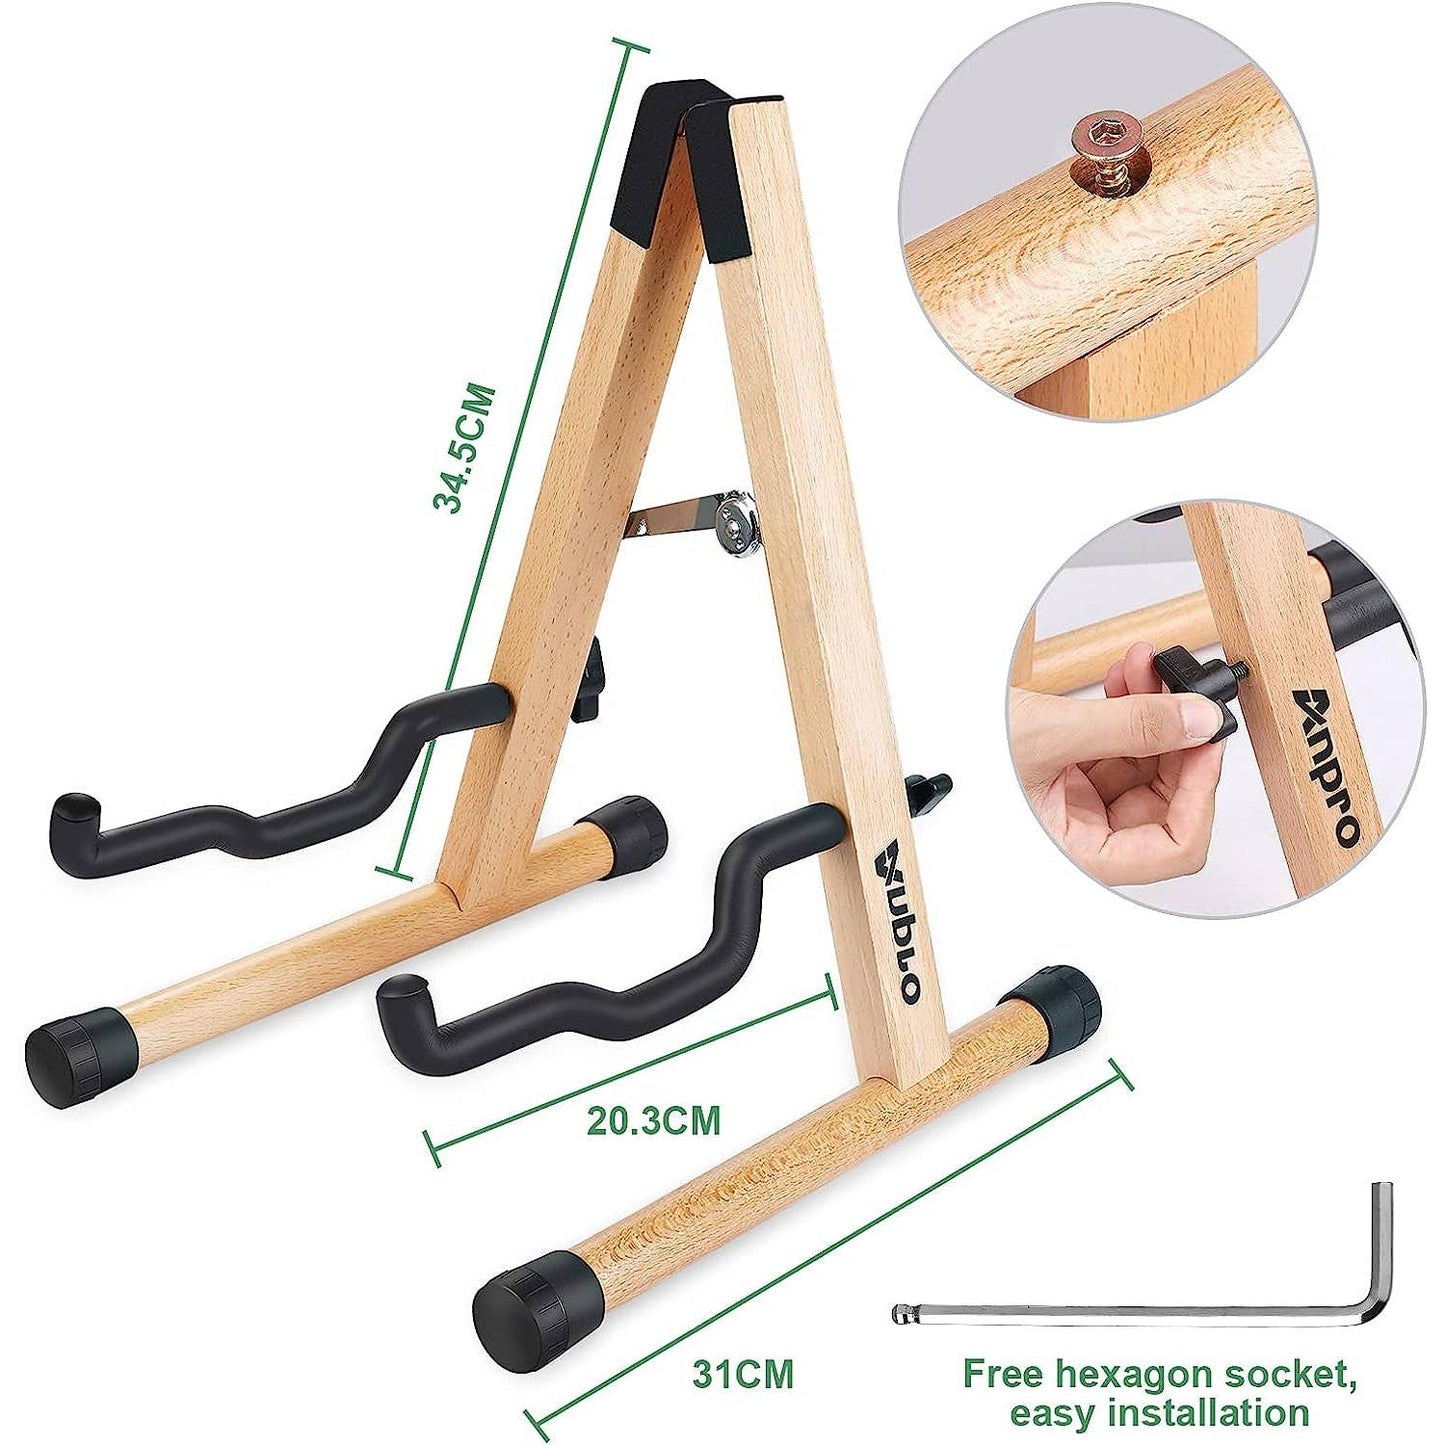 Anpro Wooden Guitar Stand Folding A Frame Universal with Foam Pad